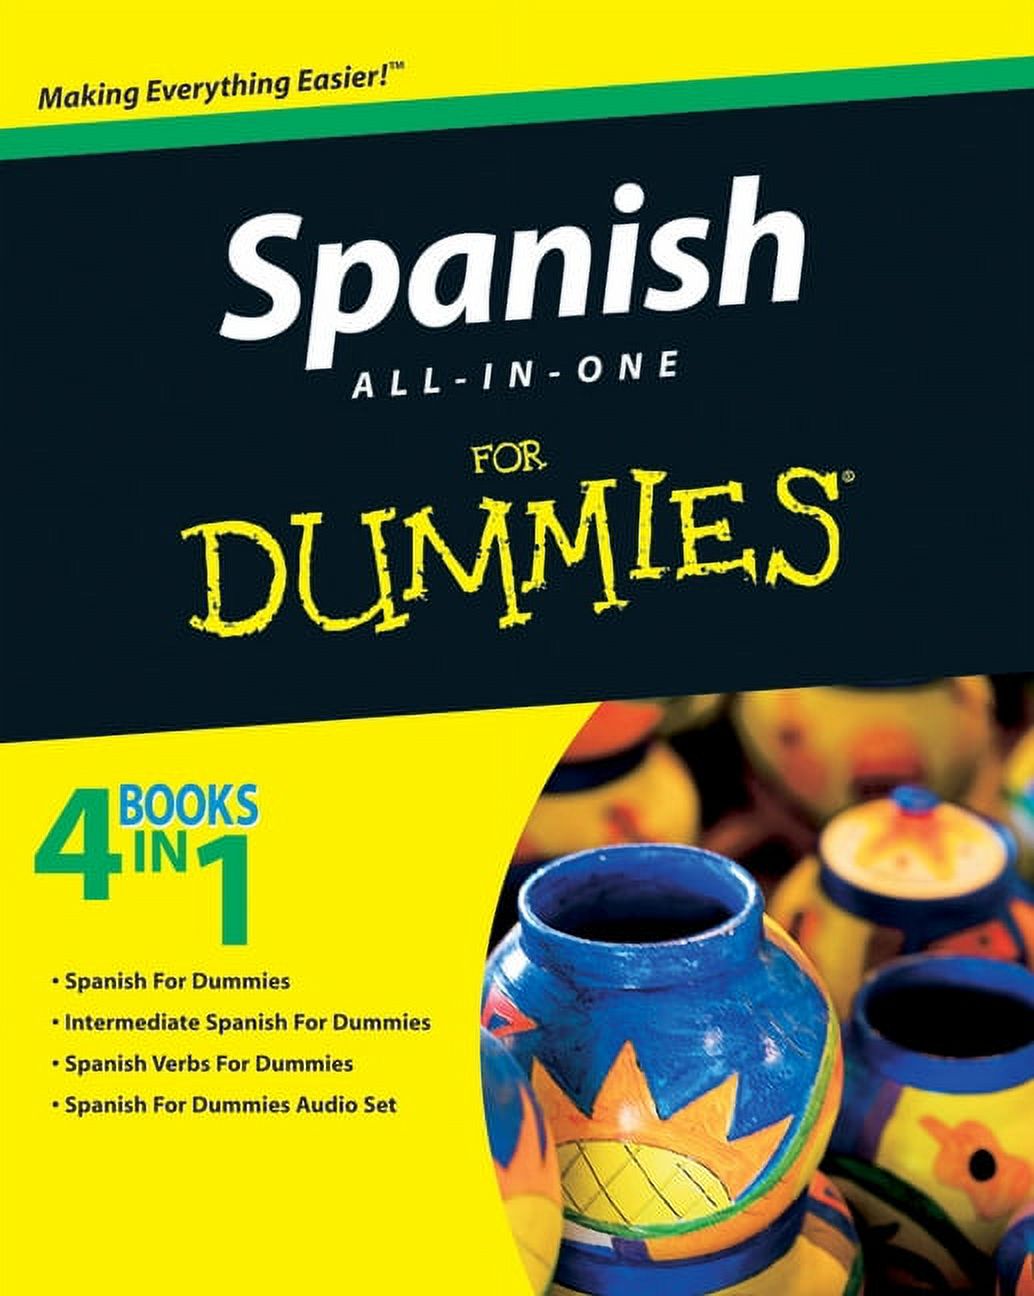 For Dummies: Spanish All-In-One for Dummies (Other) - image 1 of 1